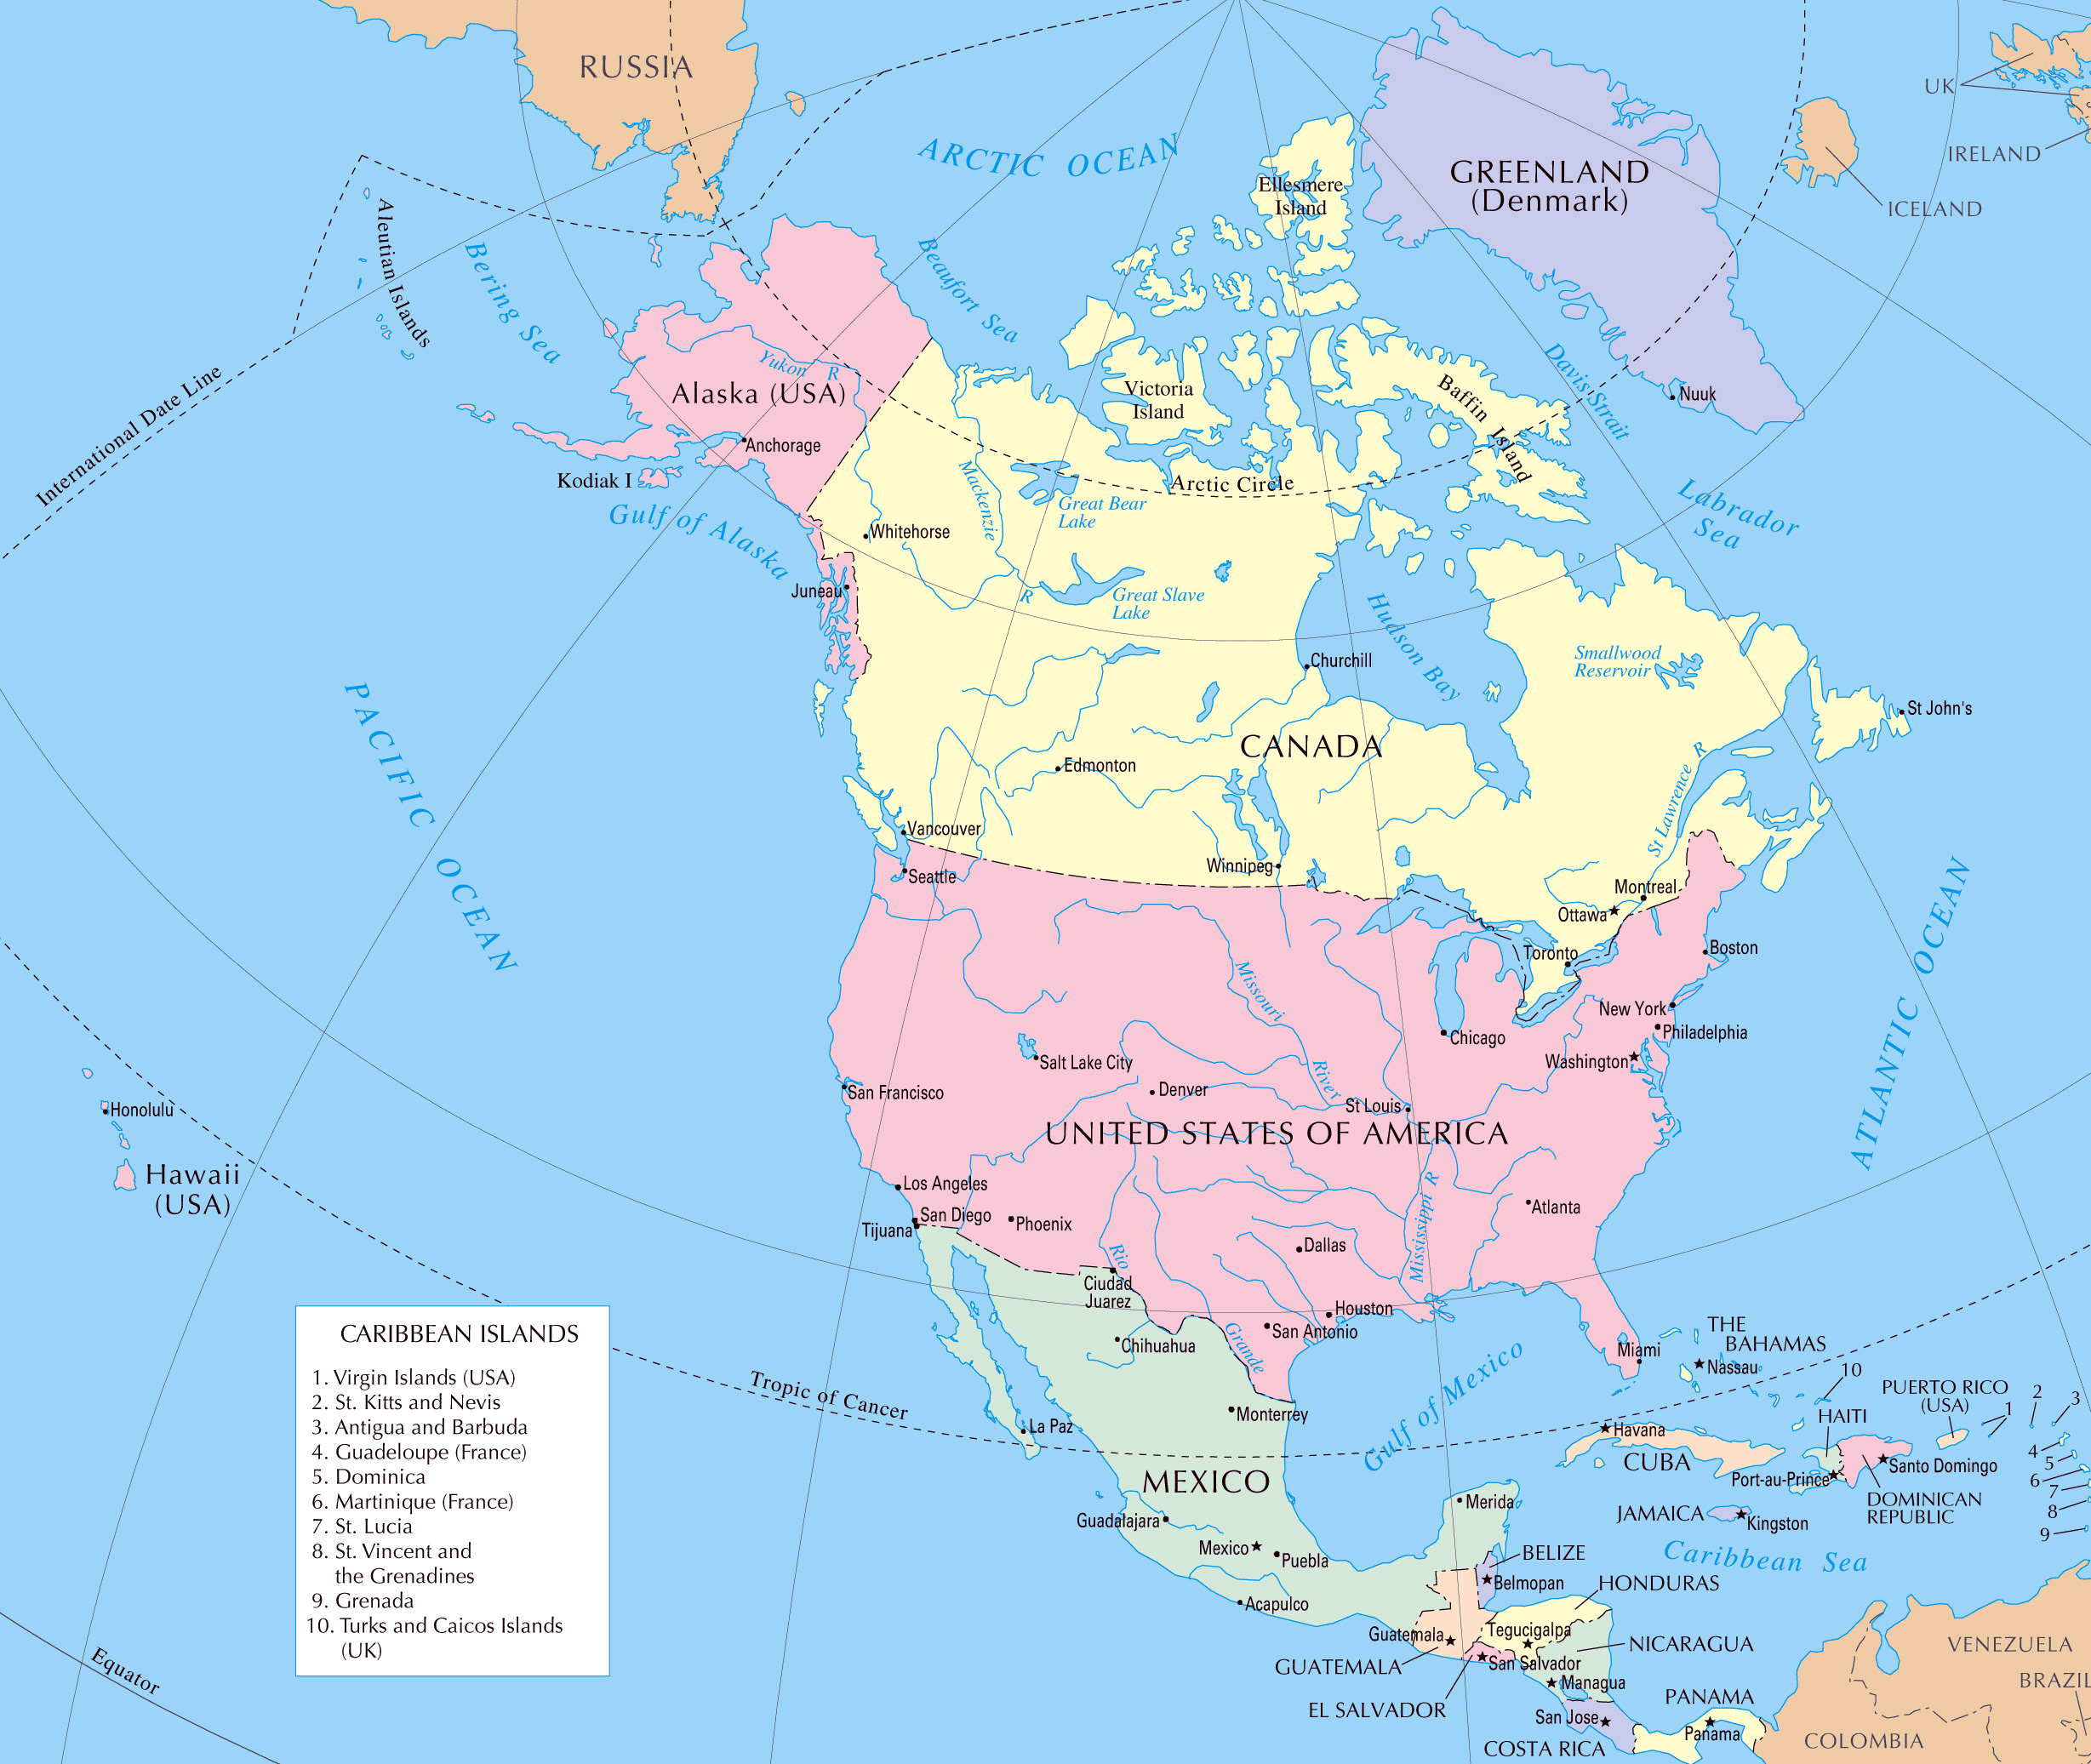 north-america-large-detailed-political-map-with-capitals-large-detailed-political-map-of-north